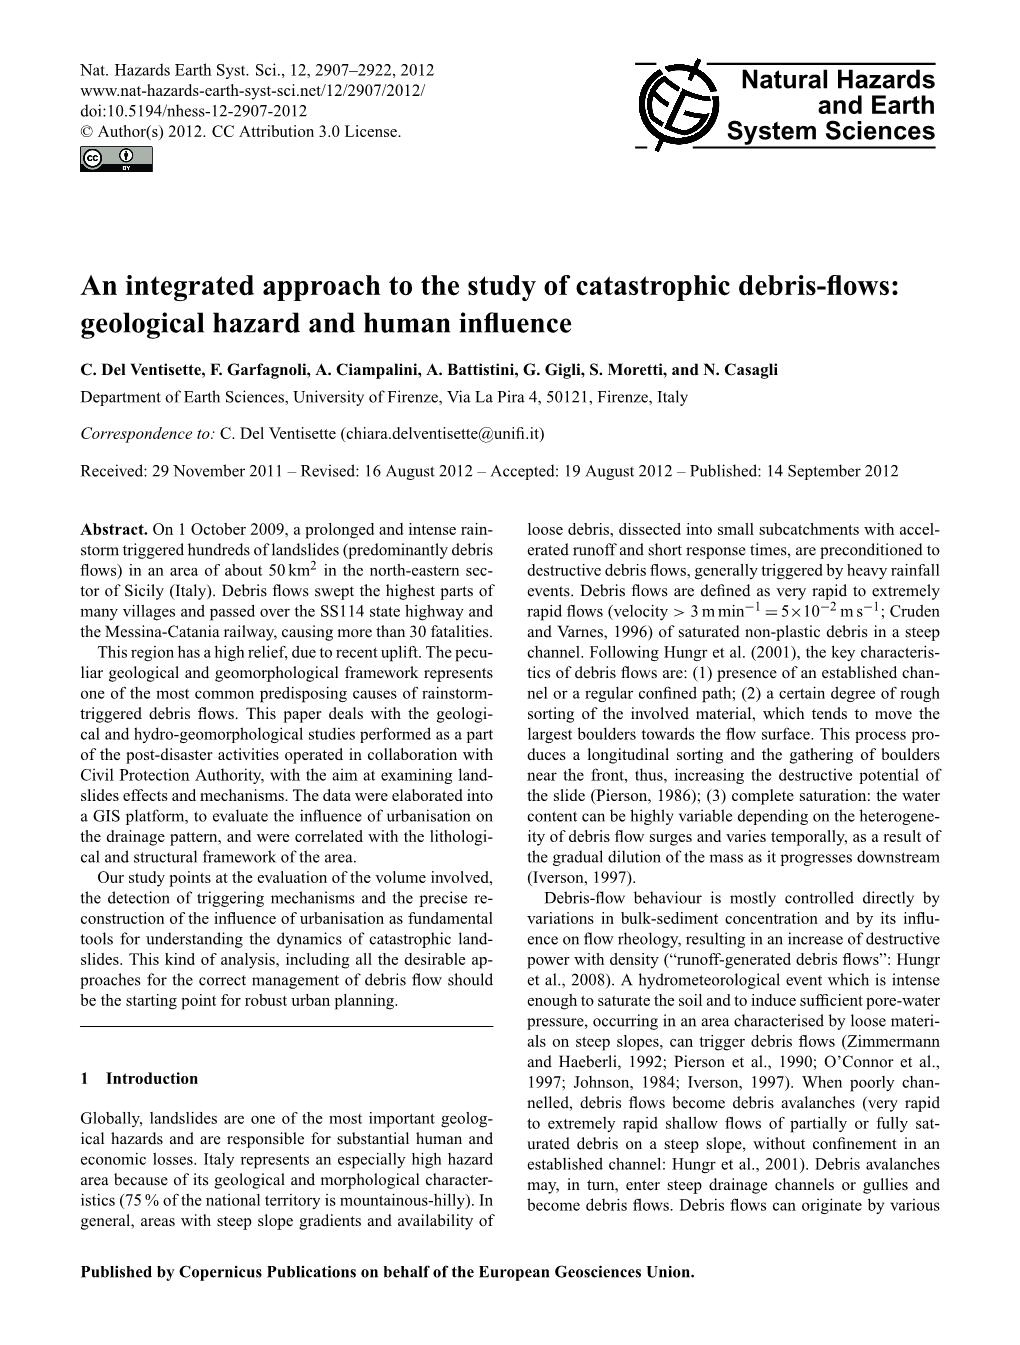 An Integrated Approach to the Study of Catastrophic Debris-Flows